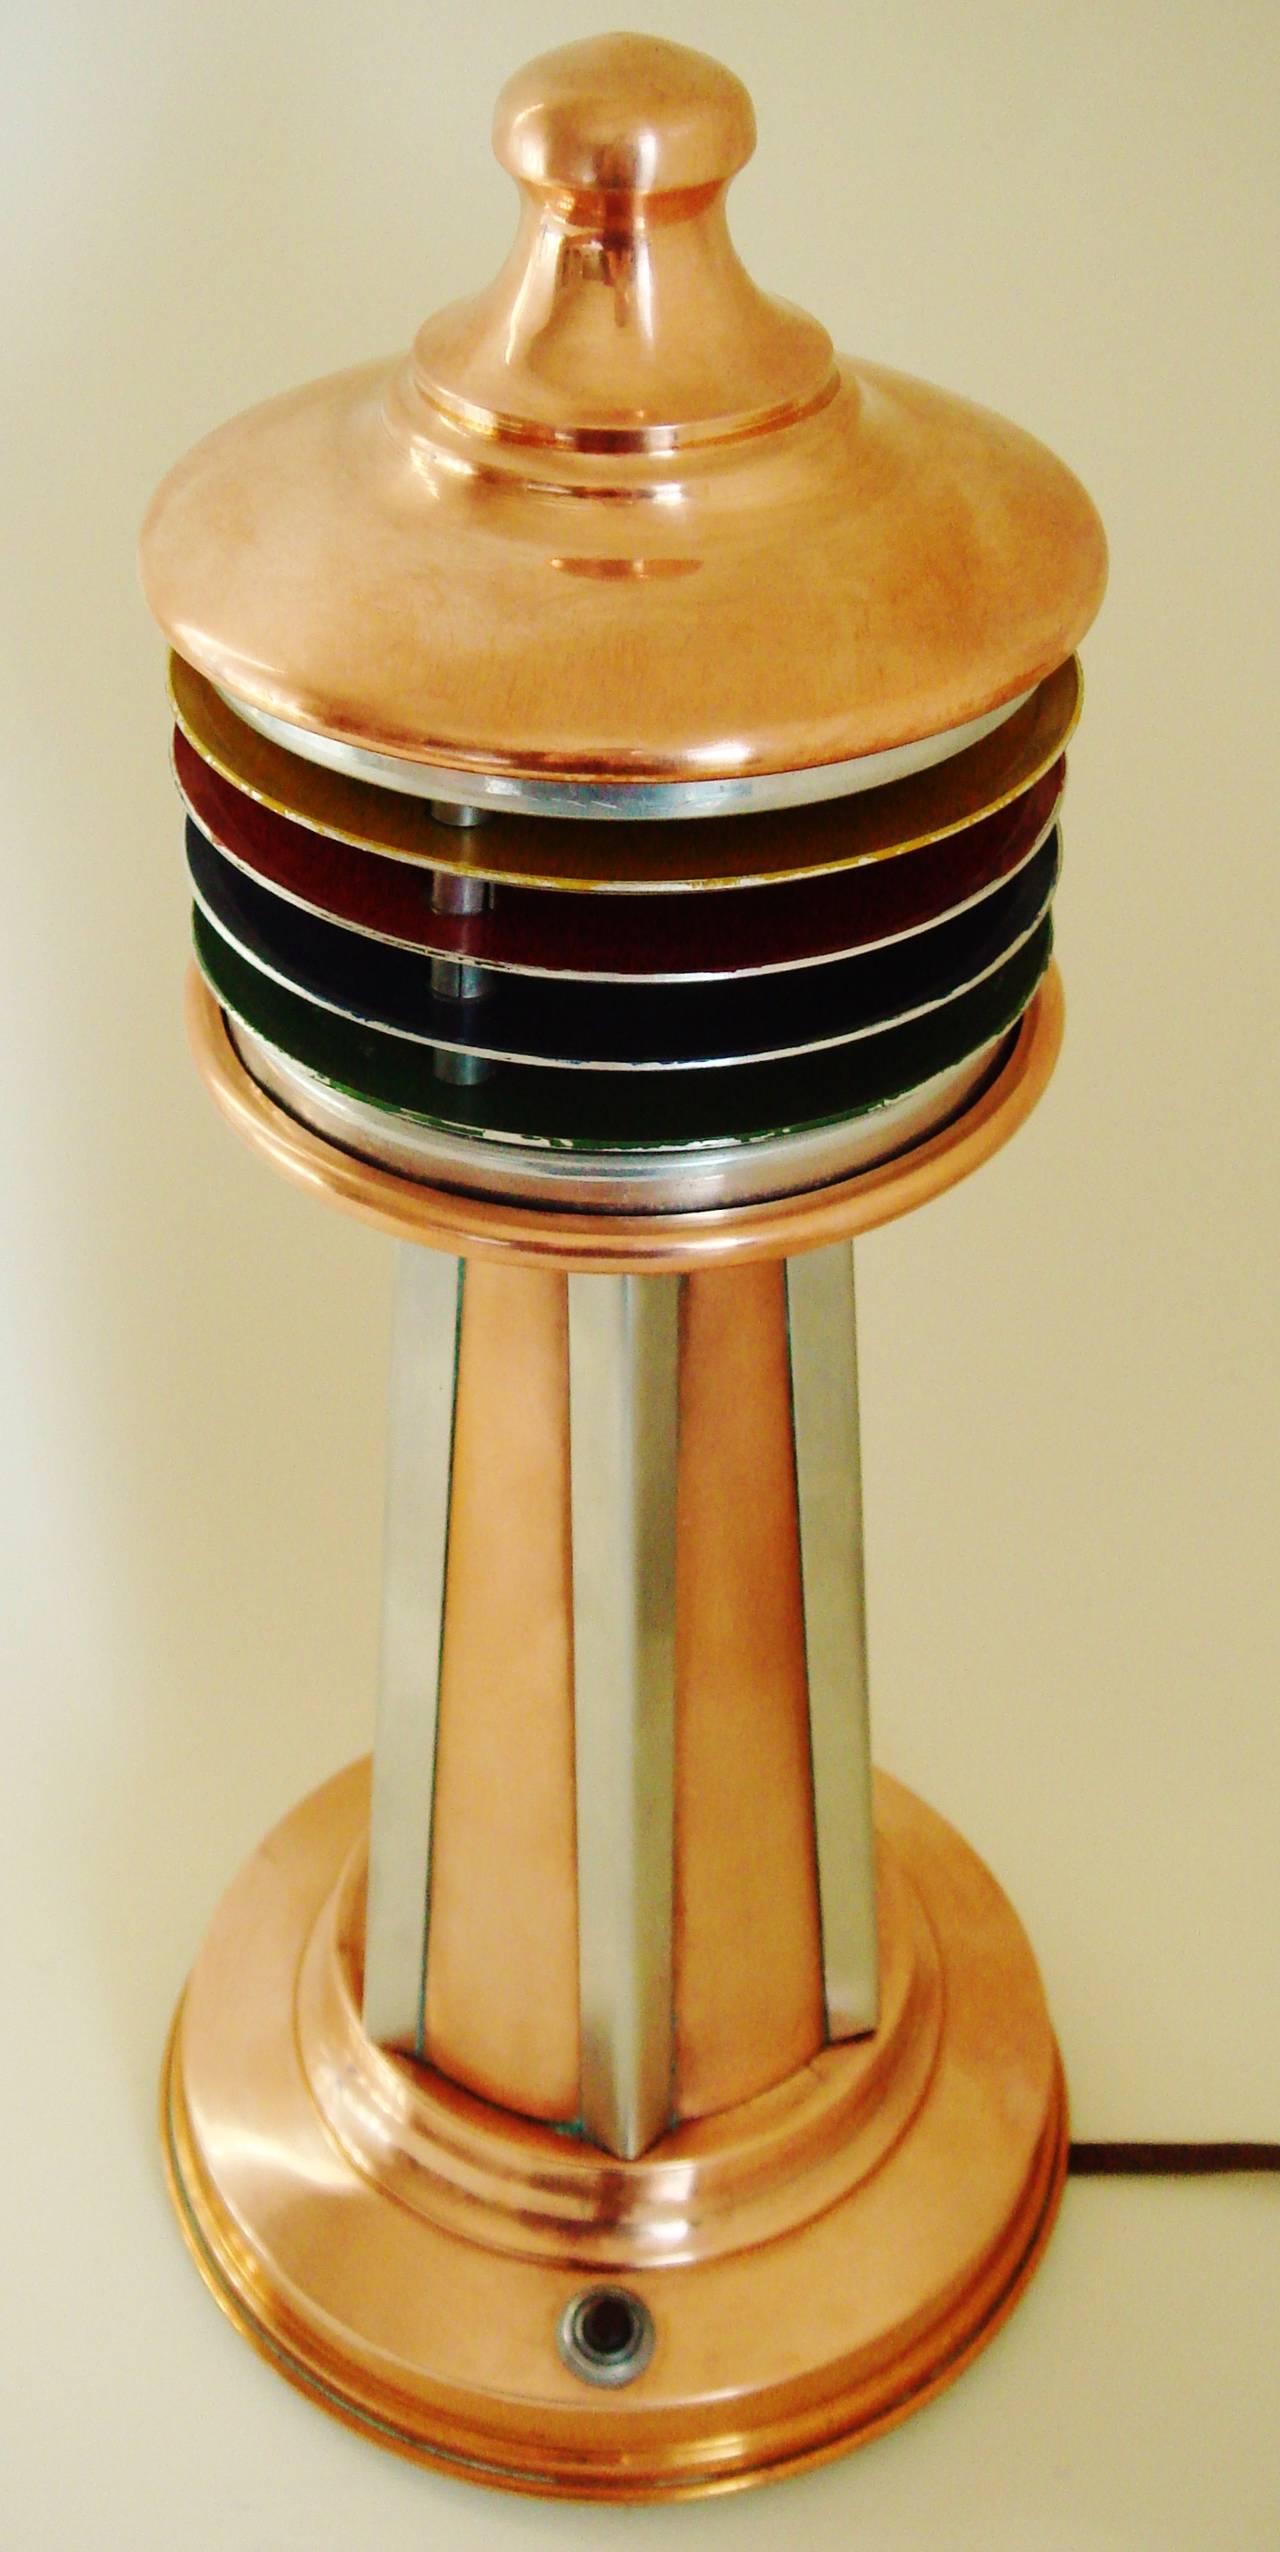 This great American Art Deco or Machine Age anodised aluminium table lamp is constructed as a sort of Buck Rogers spin on a conventional lighthouse. The louvred rings that comprise the shade have been anodised in a rainbow of colours and give a